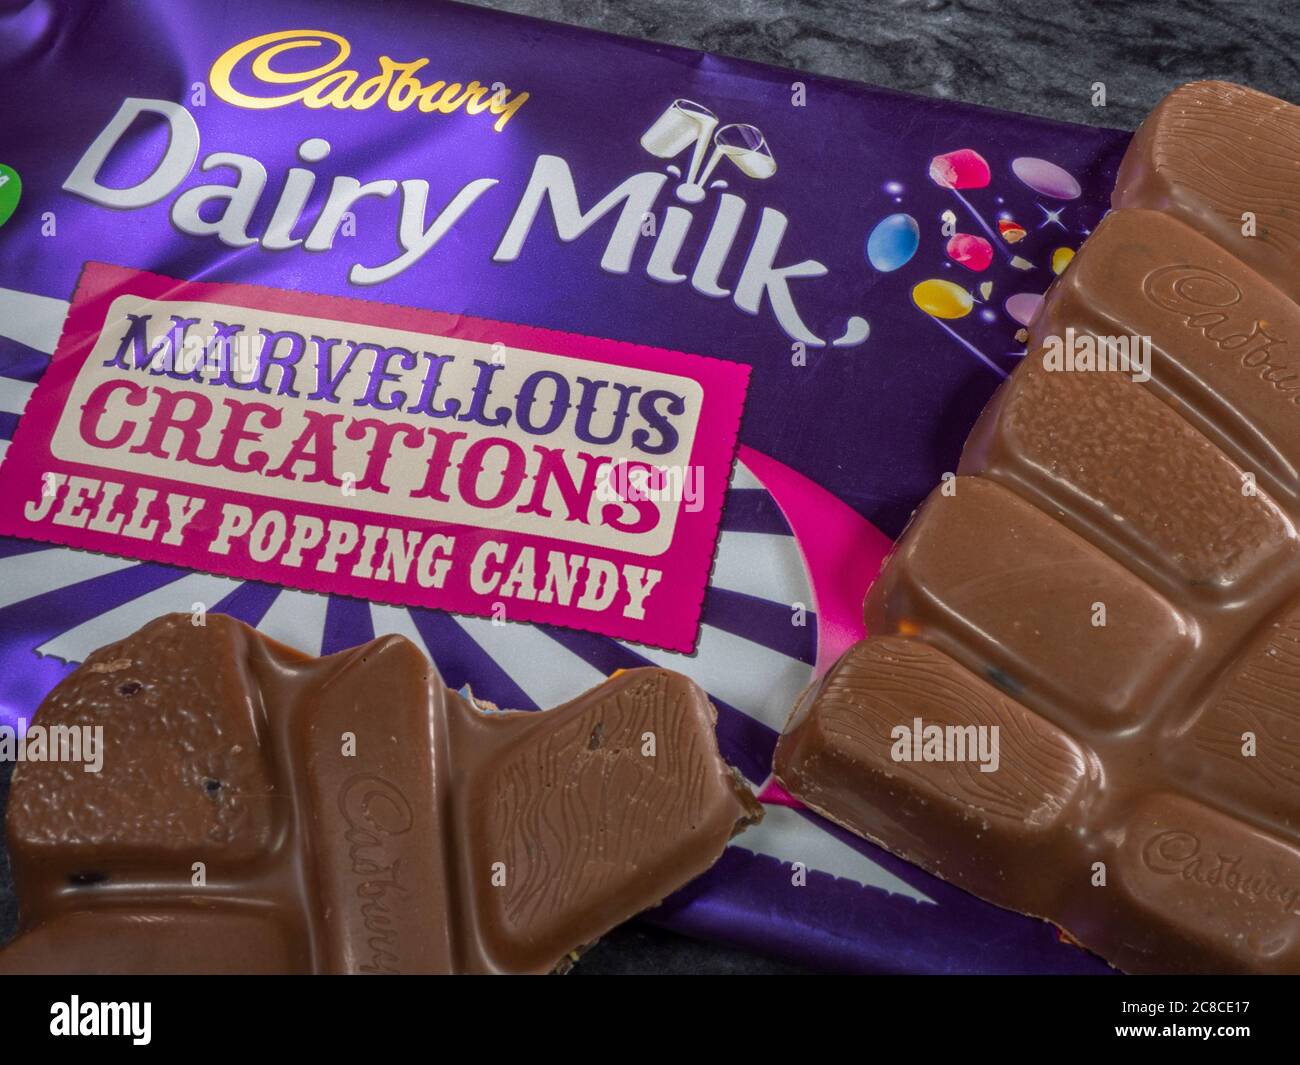 Closeup of Cadbury Dairy Milk, marvellous creations, jelly popping candy – retail product wrapper with chocolate pieces on the outside. Stock Photo